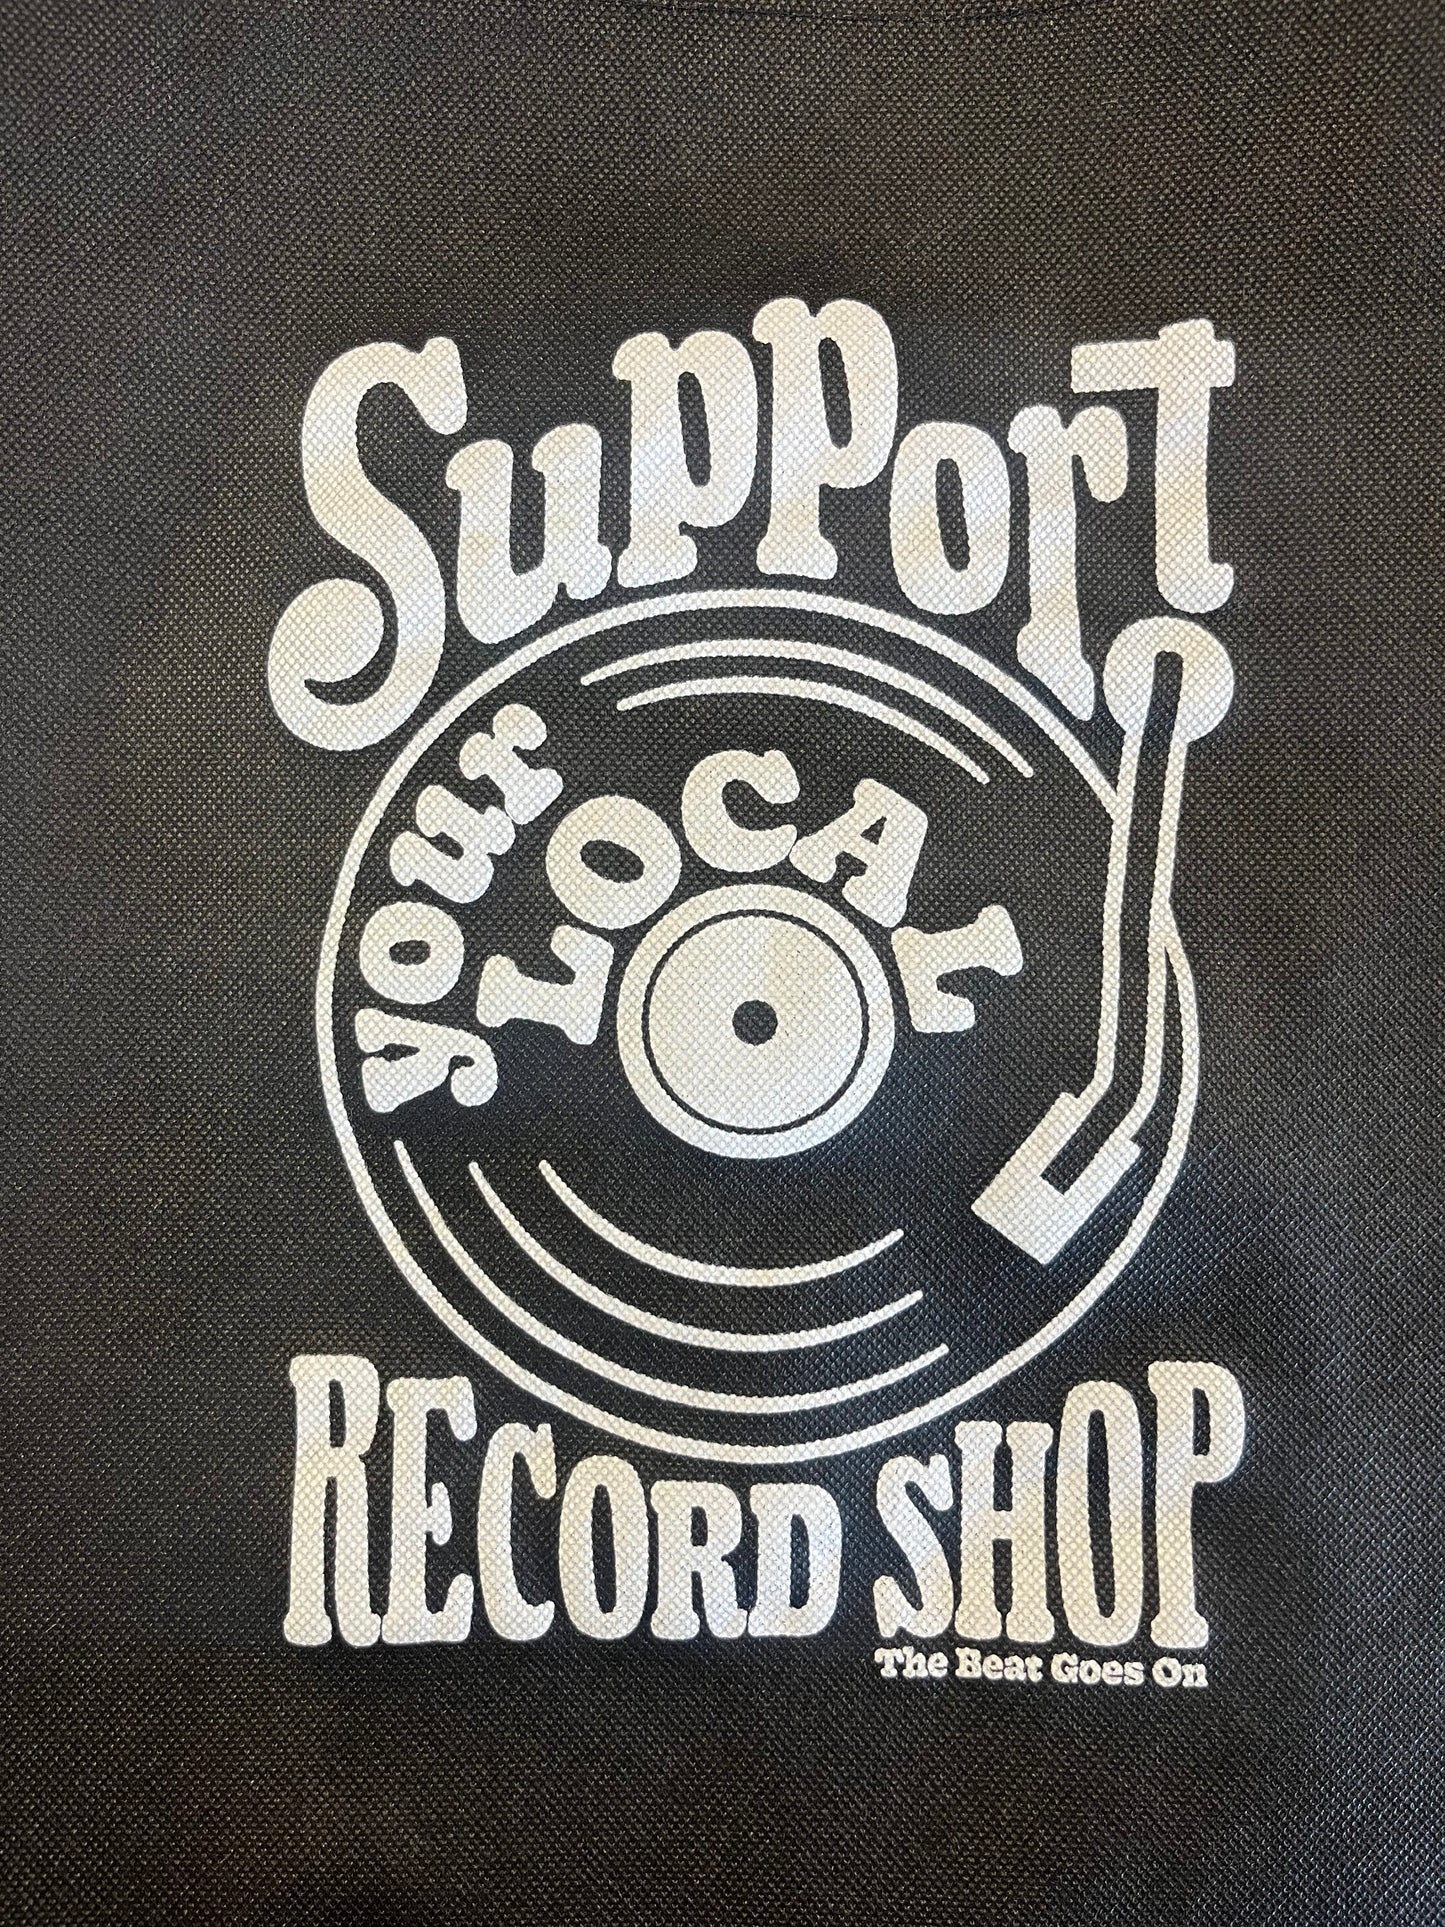 BGO Support Your Local Record Store Cloth Bag